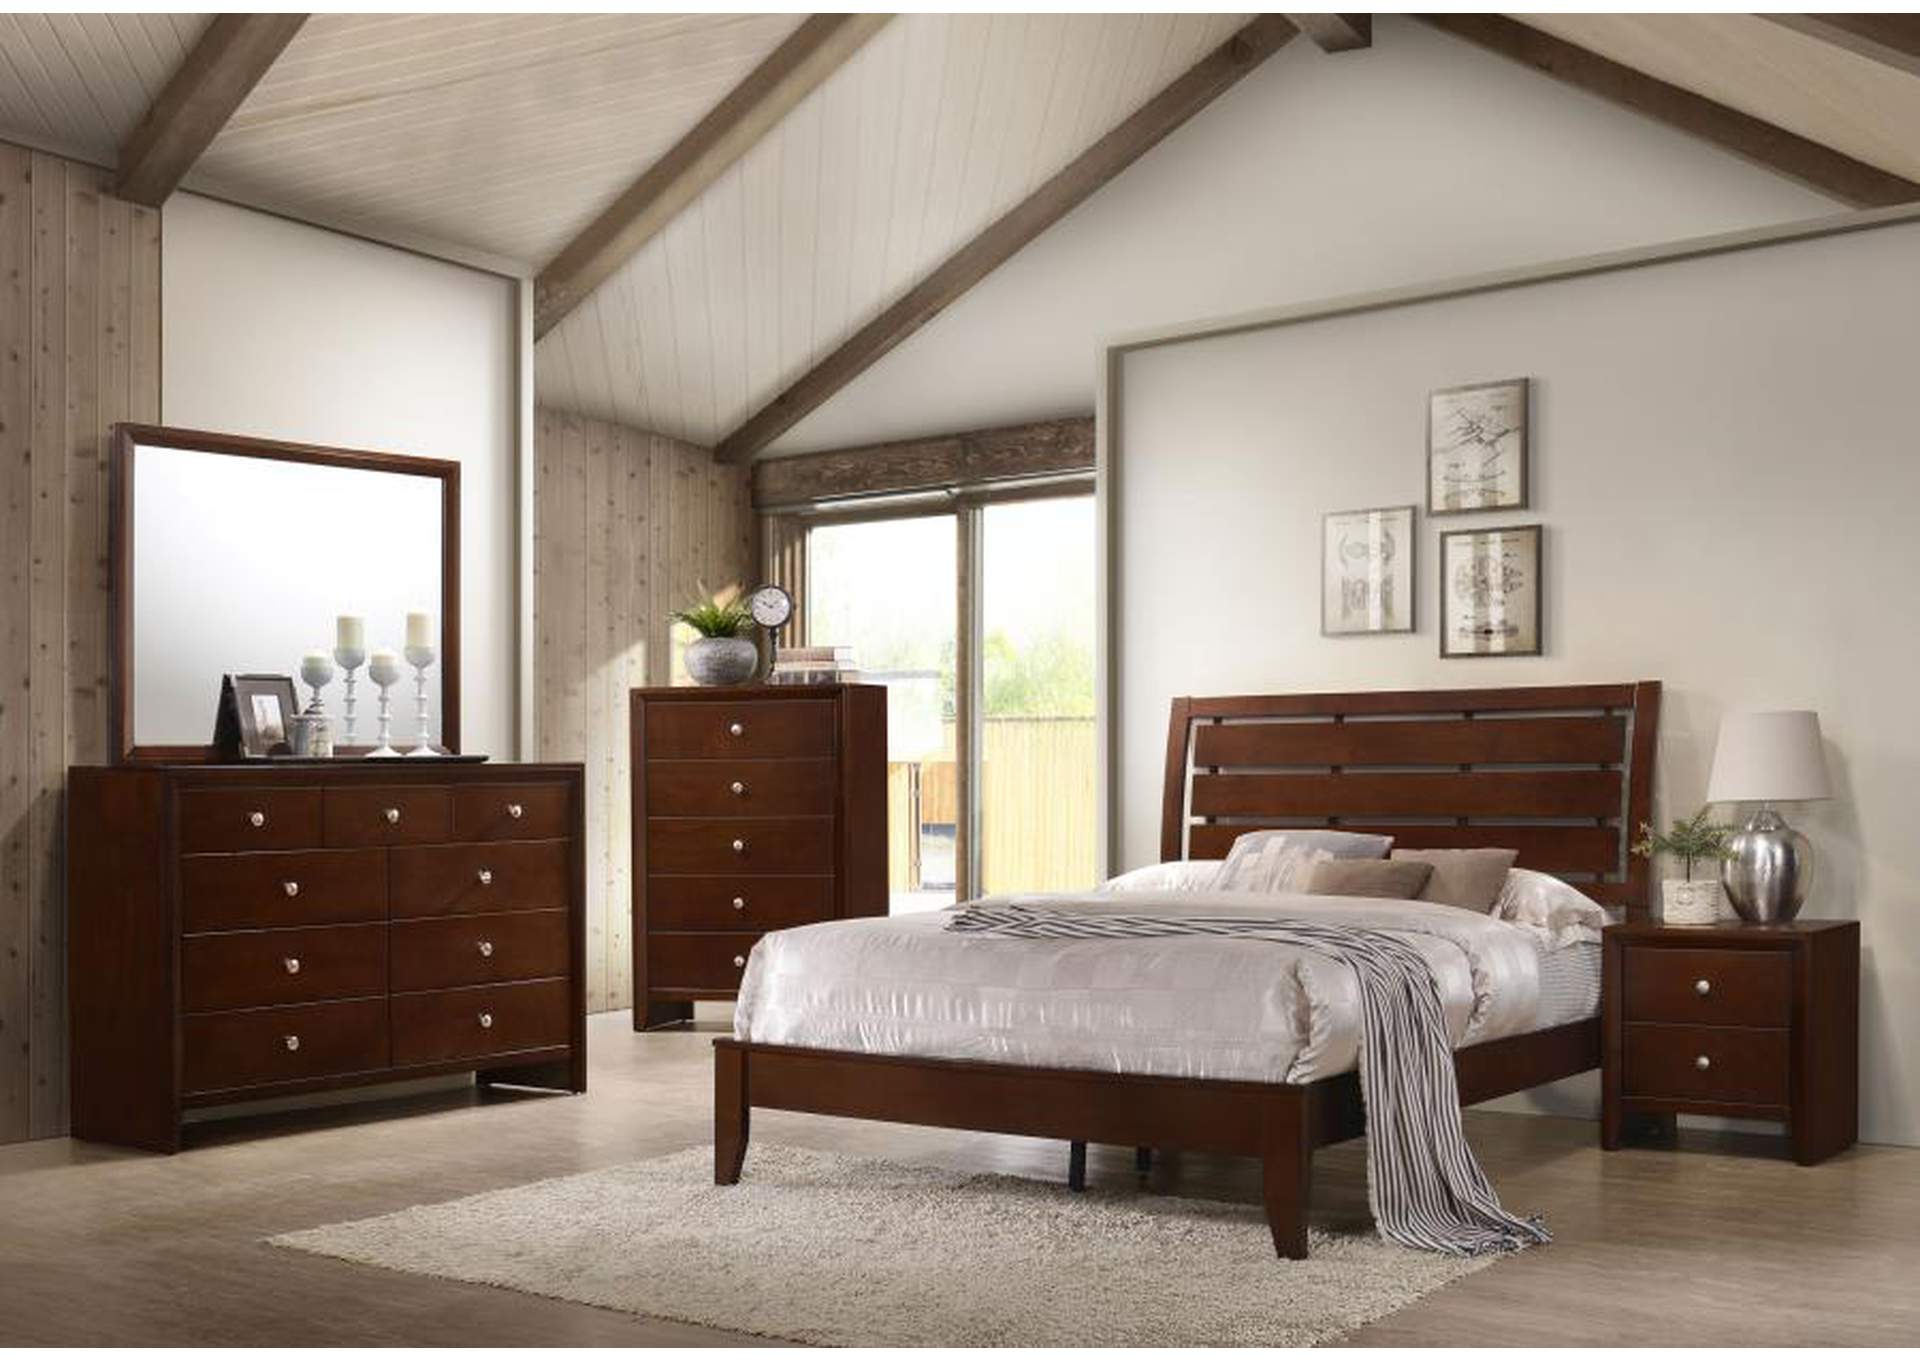 Serenity Full Panel Bed With Cut-Out Headboard Rich Merlot,Coaster Furniture